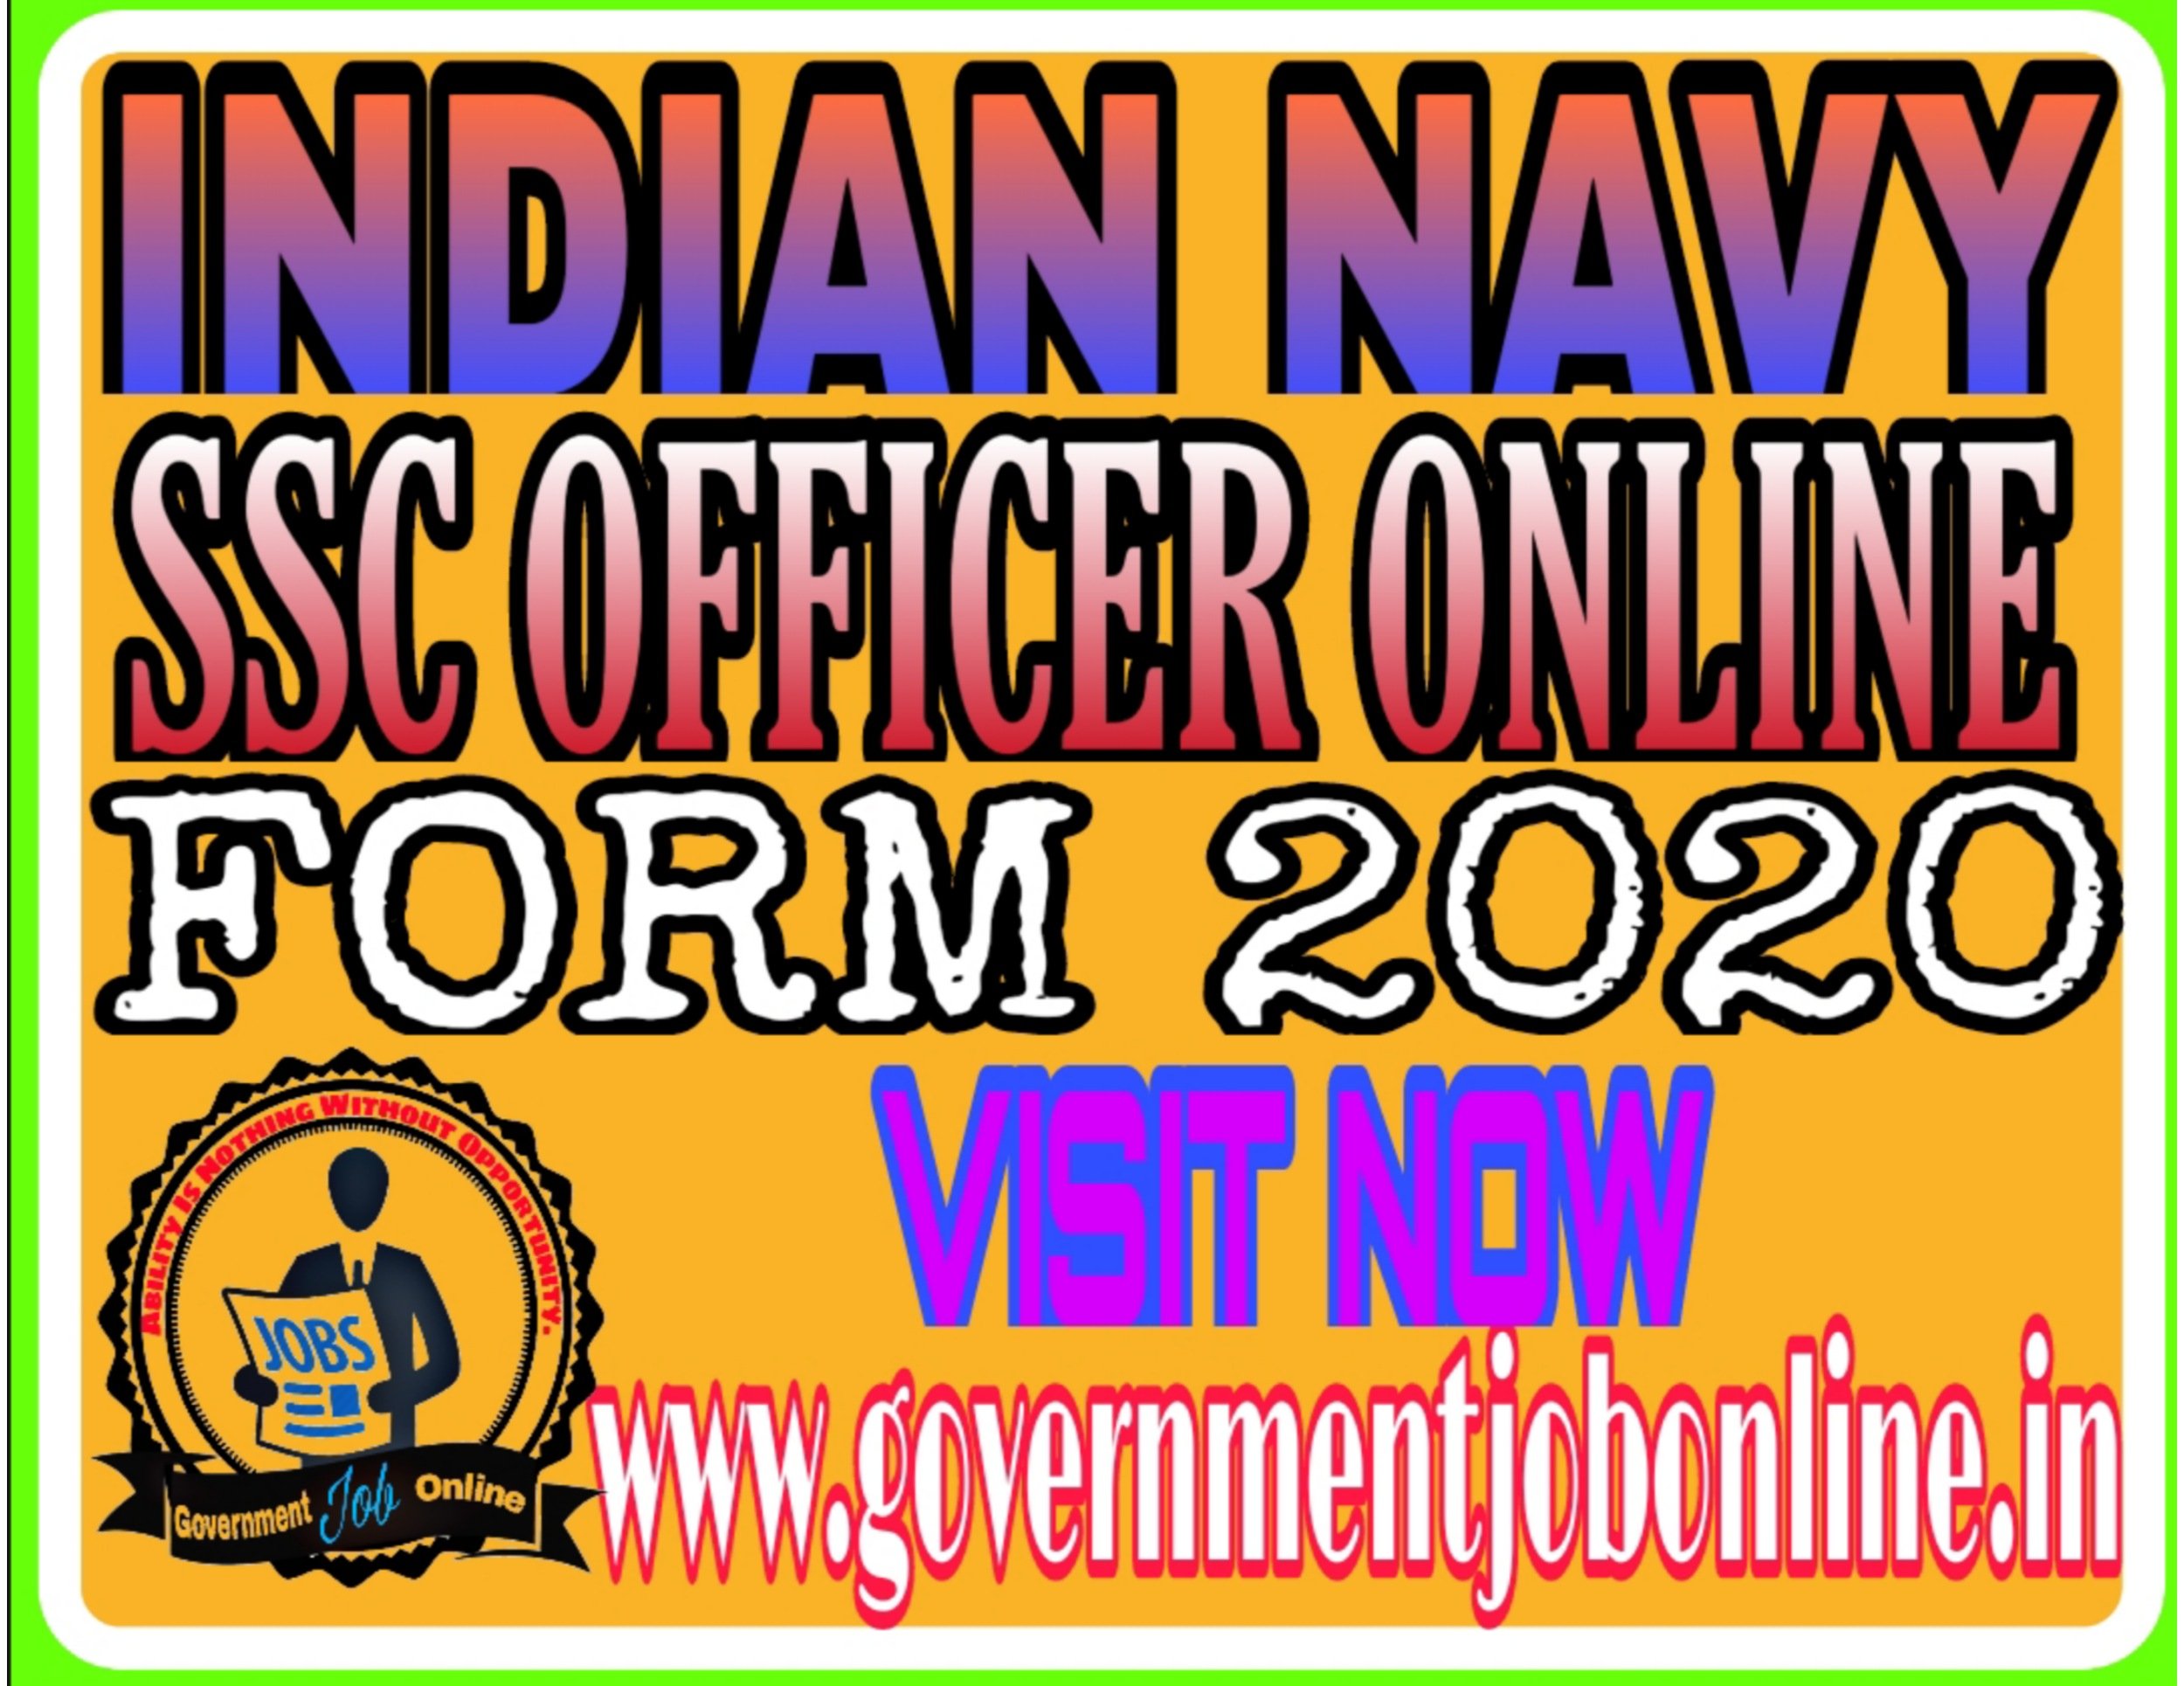 Navy SSC Officers Recruitment Online Form 2020, Navy SSC Executive IT Branch Online Form 2021